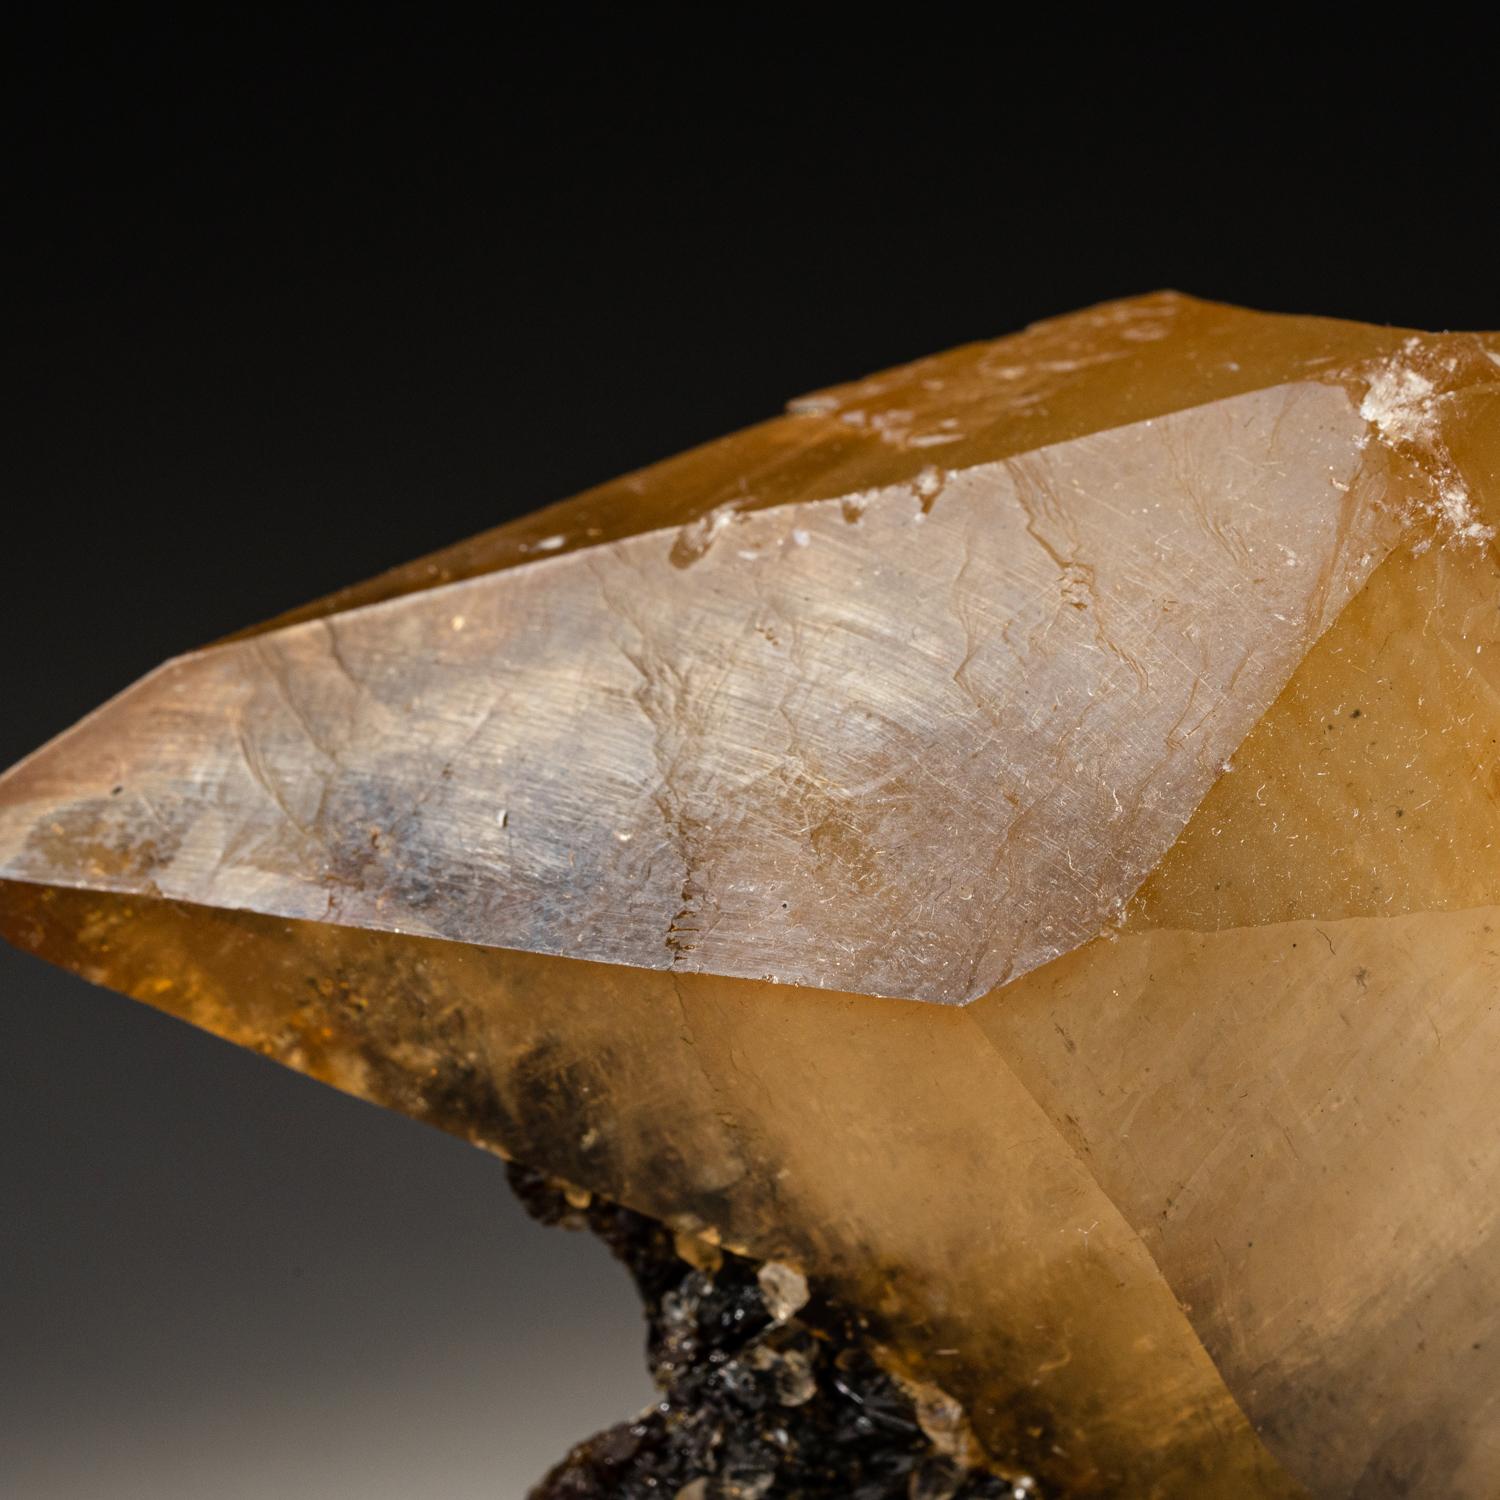 Lustrous transparent deep golden calcite crystal on small sphalerite matrix. Large double terminated scalenohedral twinned on the C-axis with well defined re-entrant faces, with sub parallel crystal growth.

 

Weight: 283.3 grams, Dimensions: 2.5 x